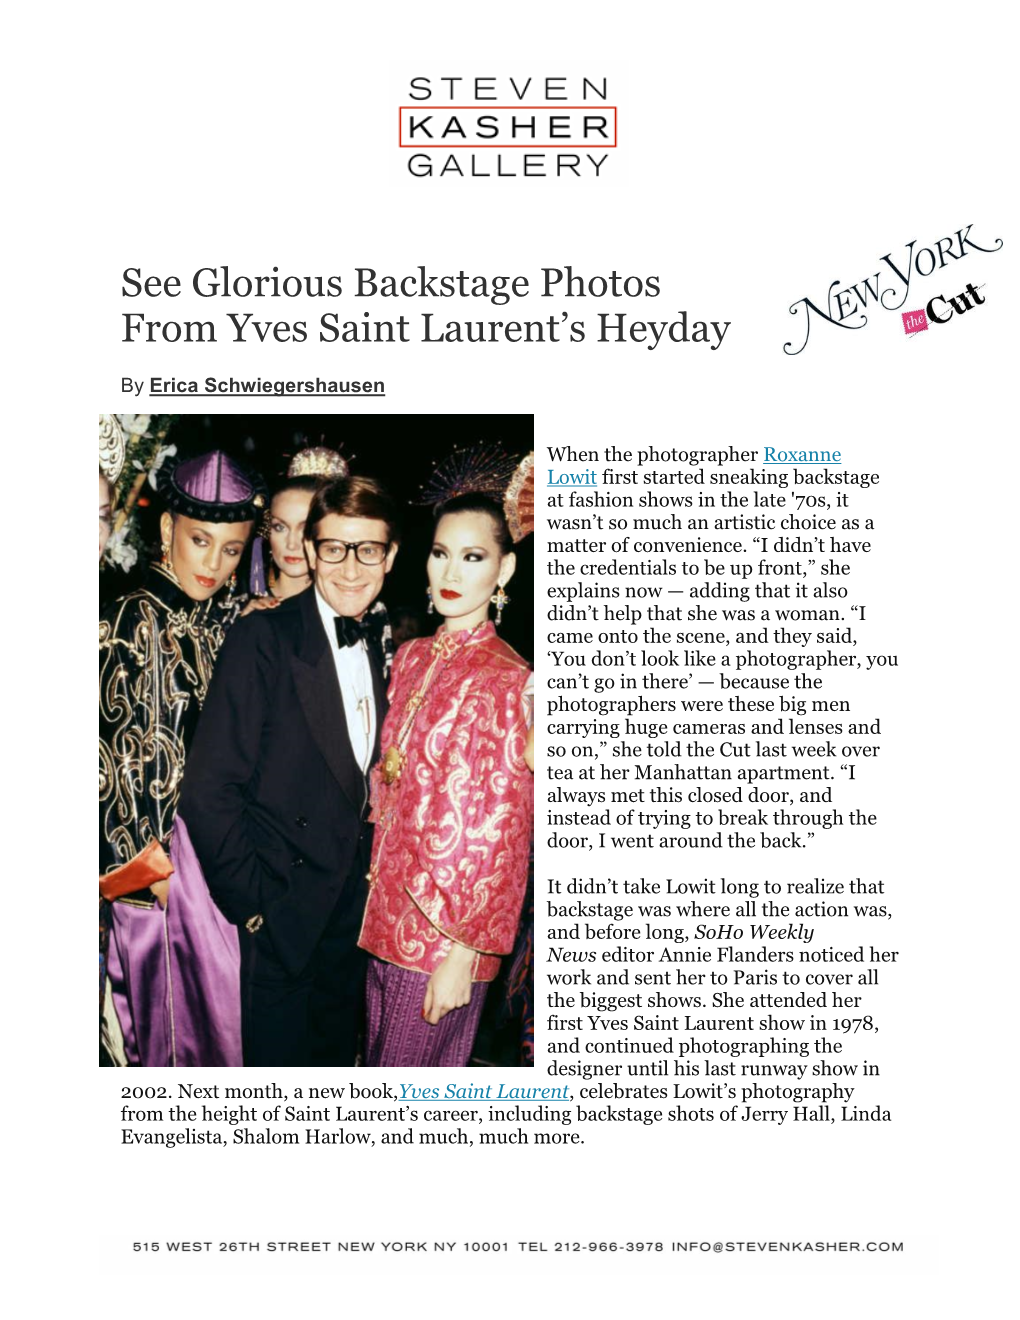 See Glorious Backstage Photos from Yves Saint Laurent's Heyday